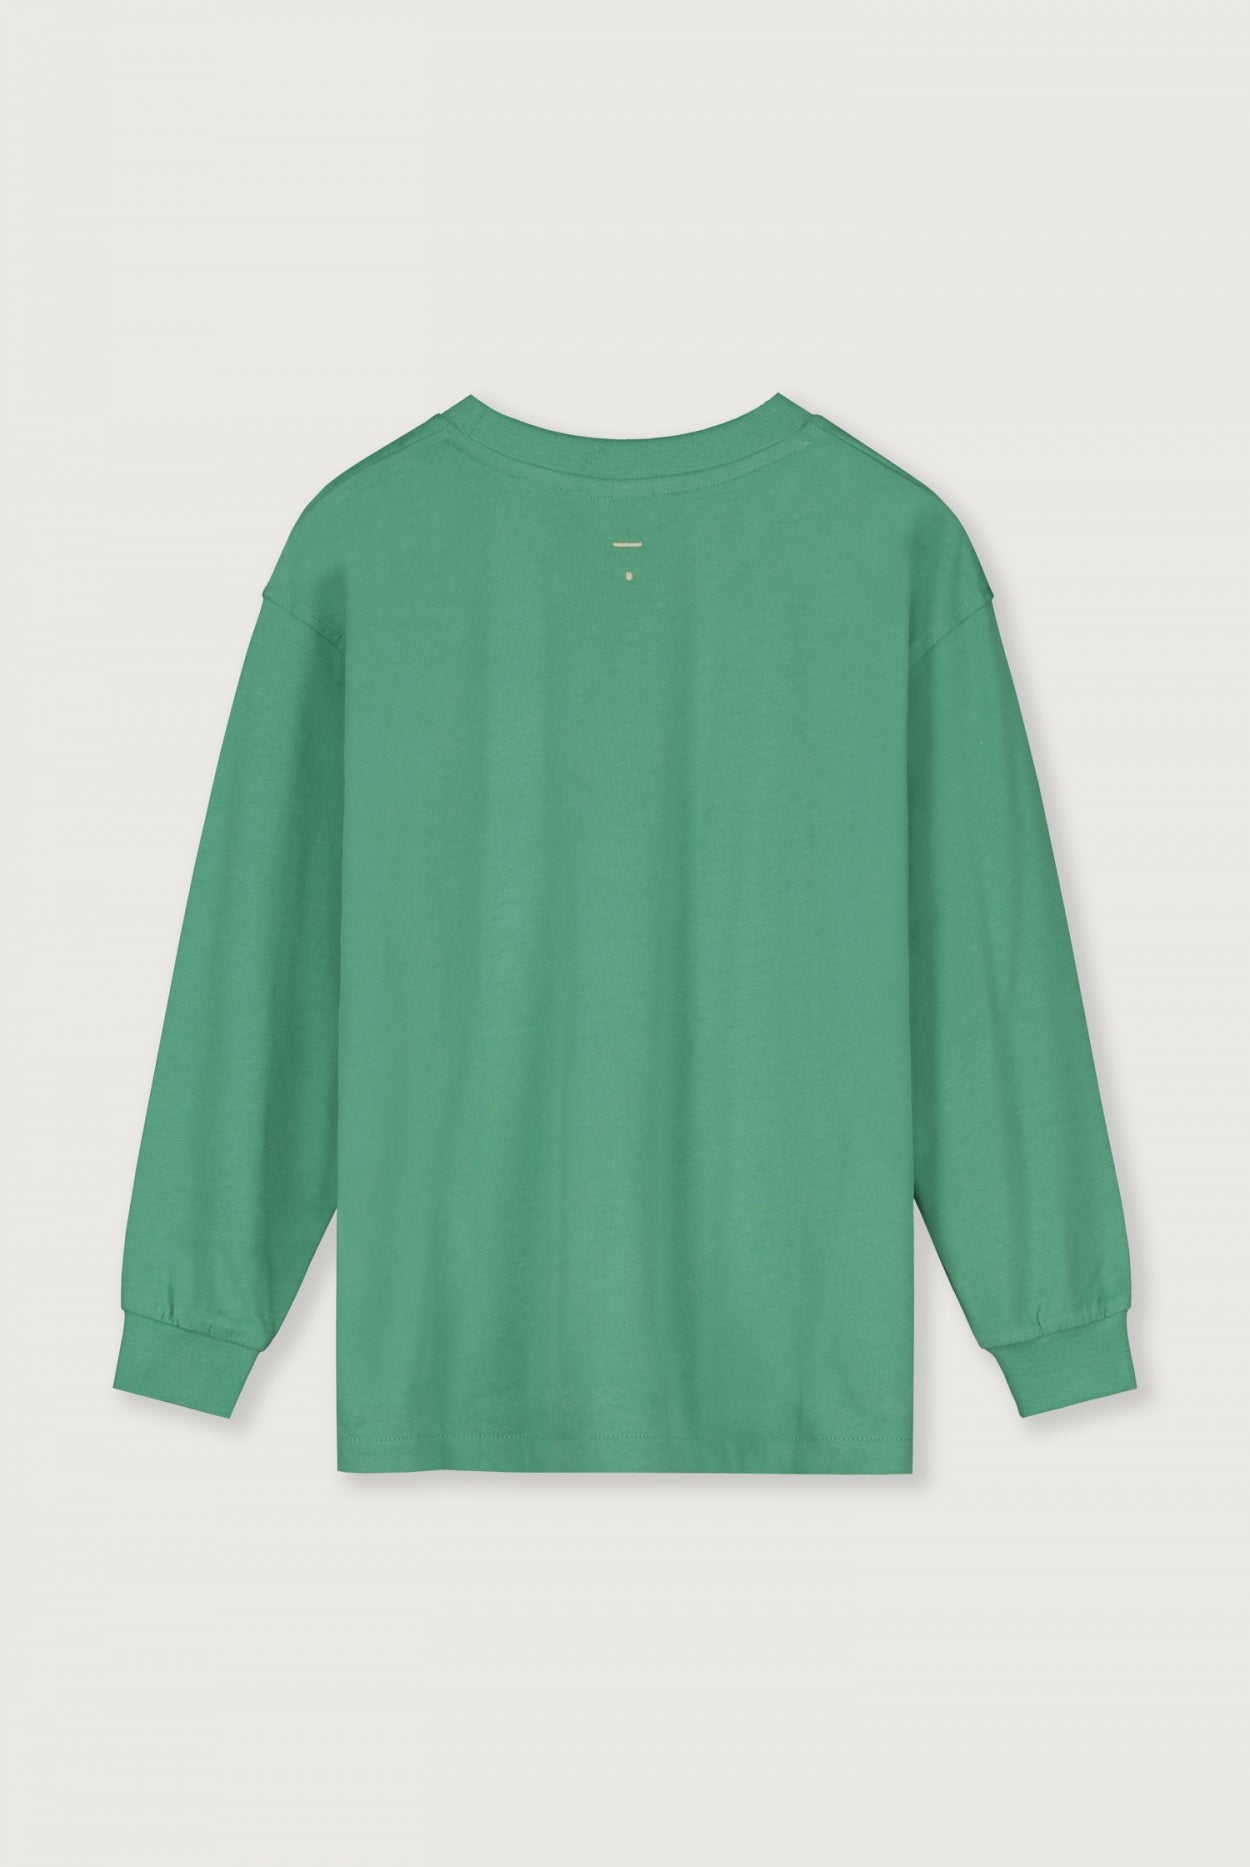 Oversized L/S Tee Bright Green